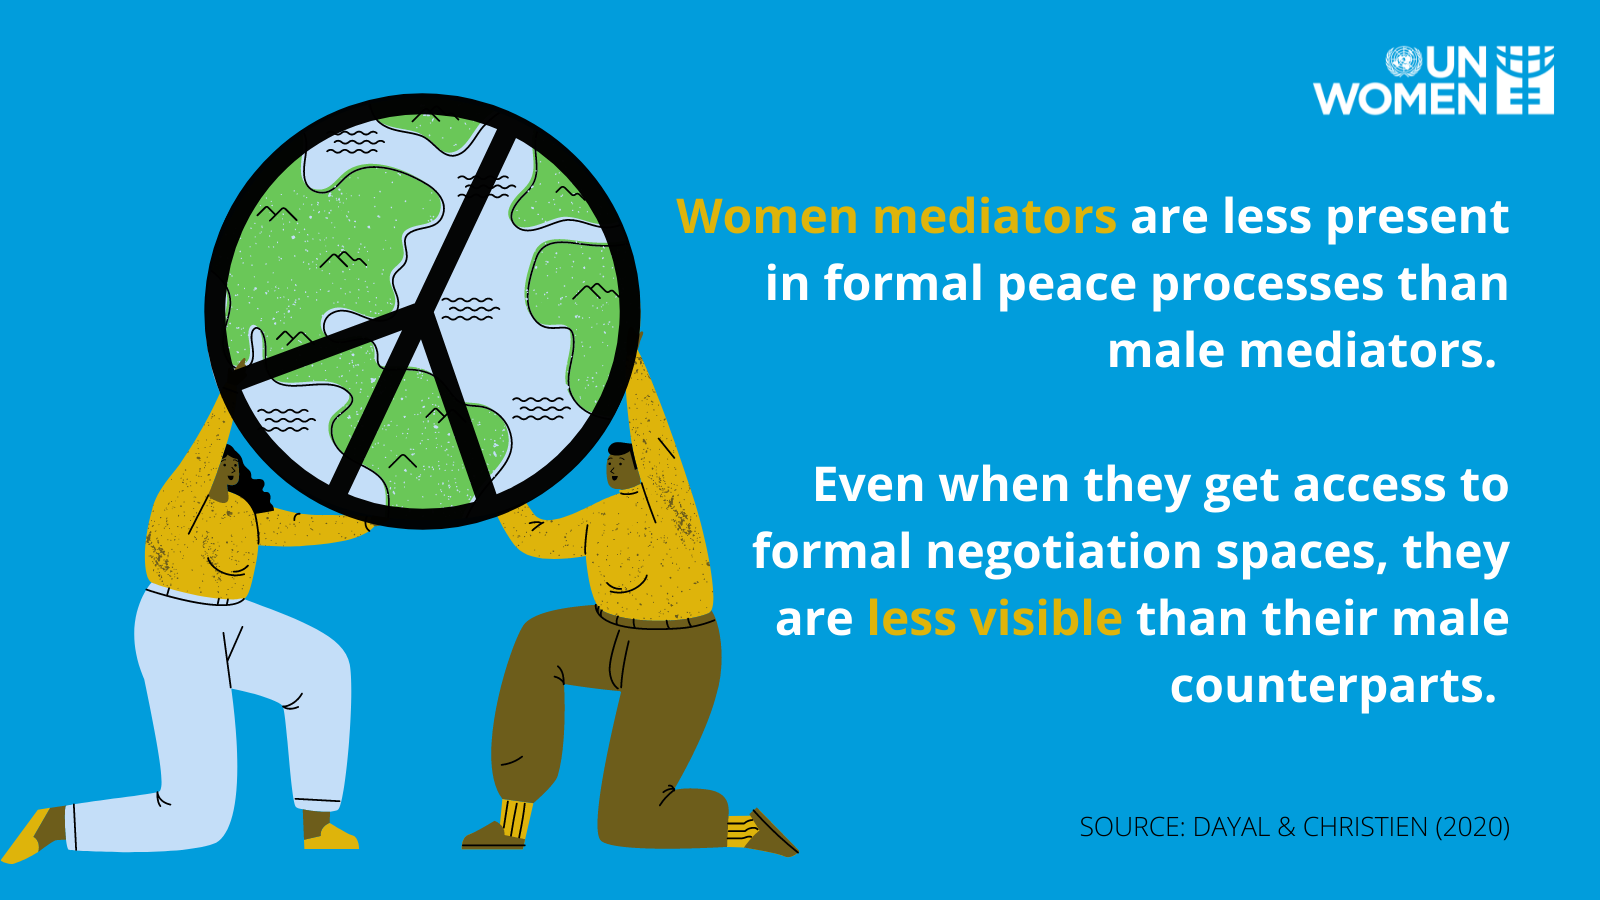 Women mediators are less present in formal peace processes than their mail counterparts.